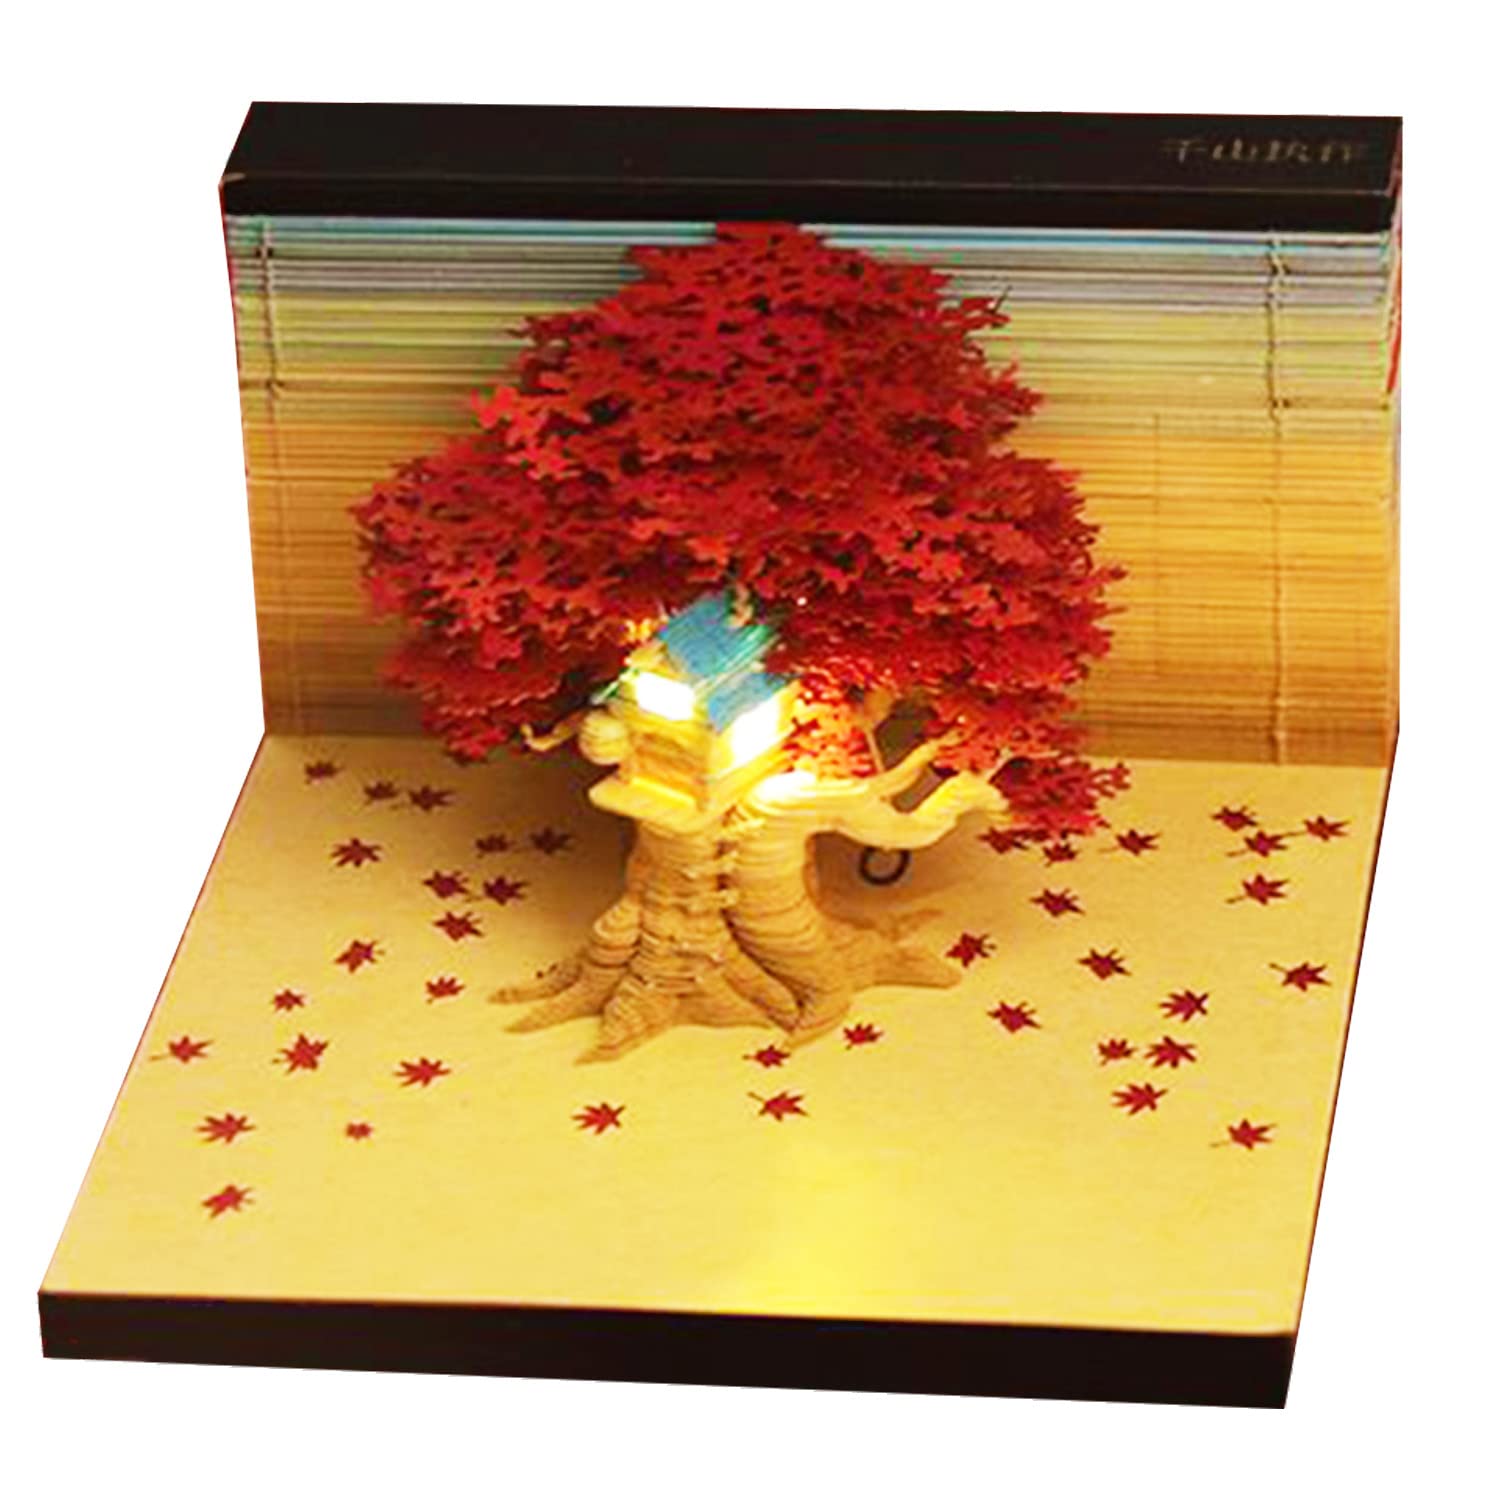 Cherry Blossom Fantasy - 3D Memo Pad with Led Light（Red)-BOOK NOOK WORLD